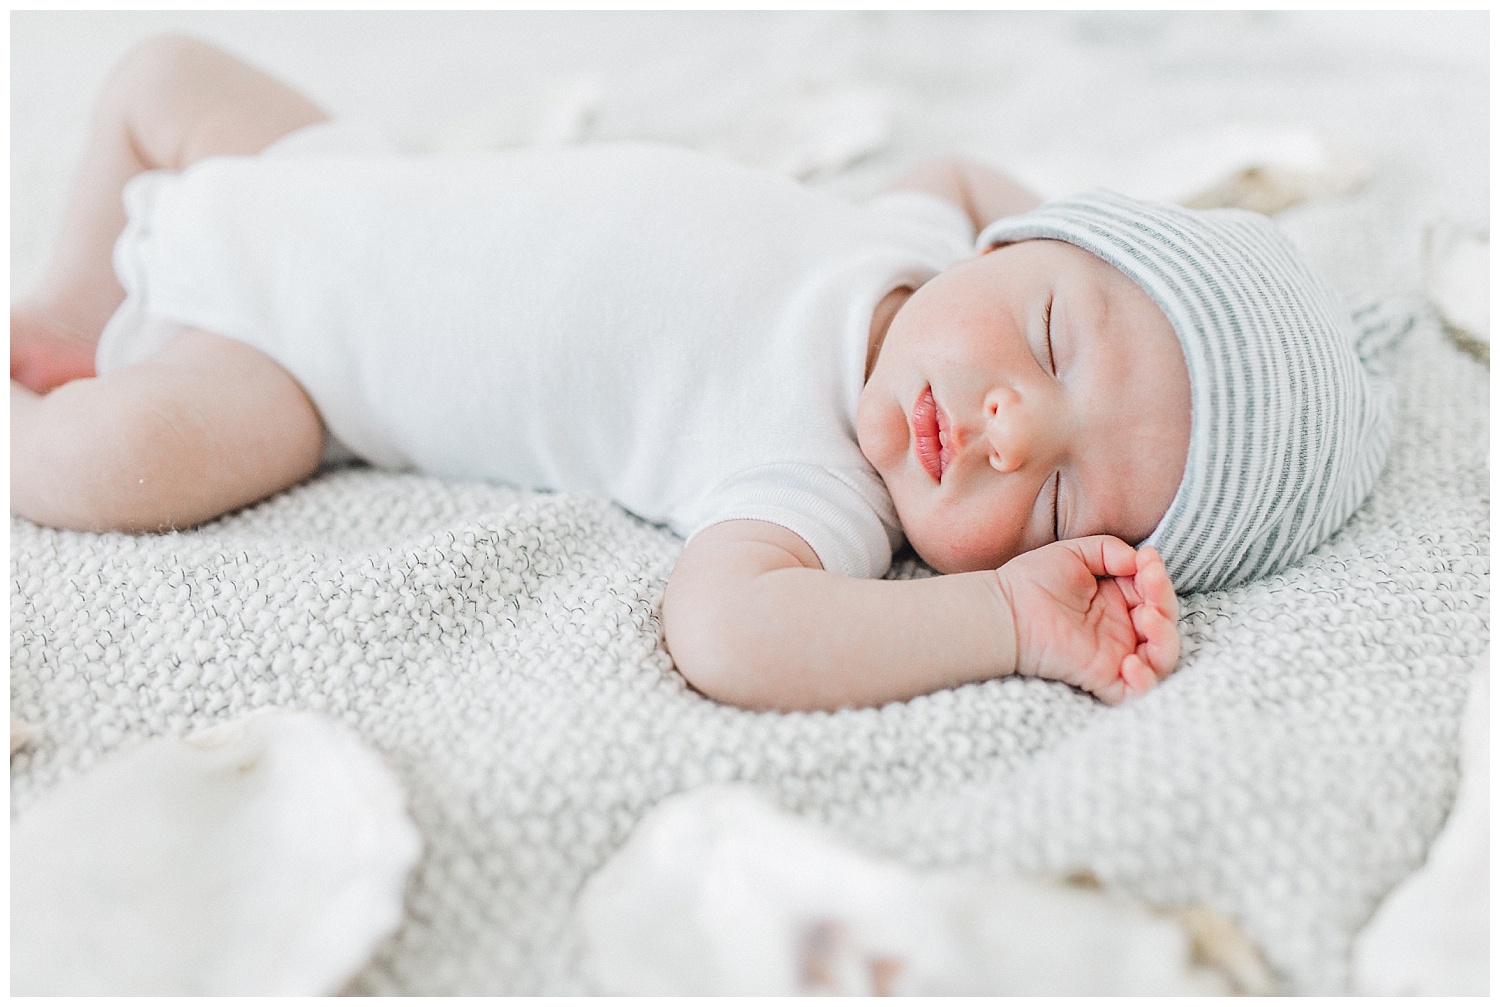 Newborn Lifestyle In-Studio Photo Session Light and Airy Kindred Presets Emma Rose Company Seattle Portland Wedding and Portrait Photographer20.jpg